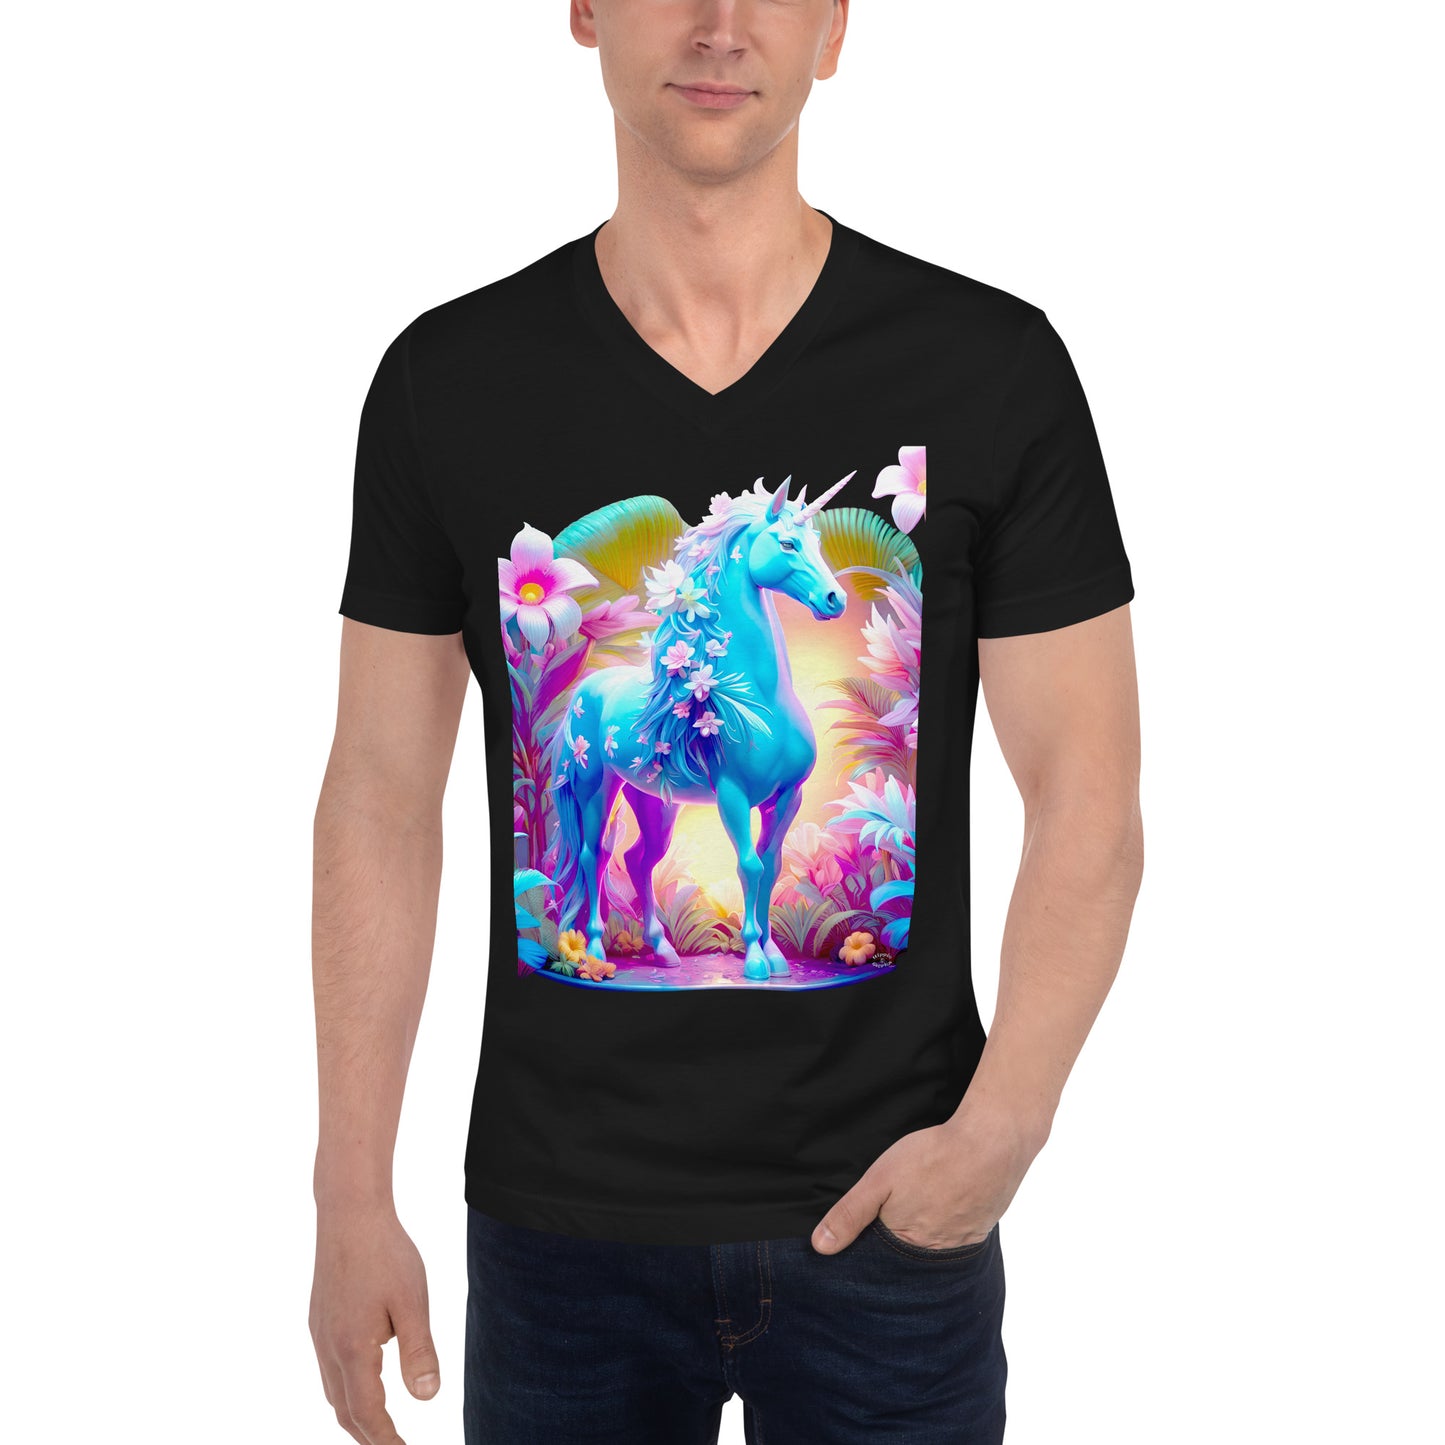 A picture of a man wearing a tshirt with a brightly colored unicorn surrounded by a colorful garden - Jungle Unicorn Unisex Short Sleeve V-Neck TShirt Media - ft - black